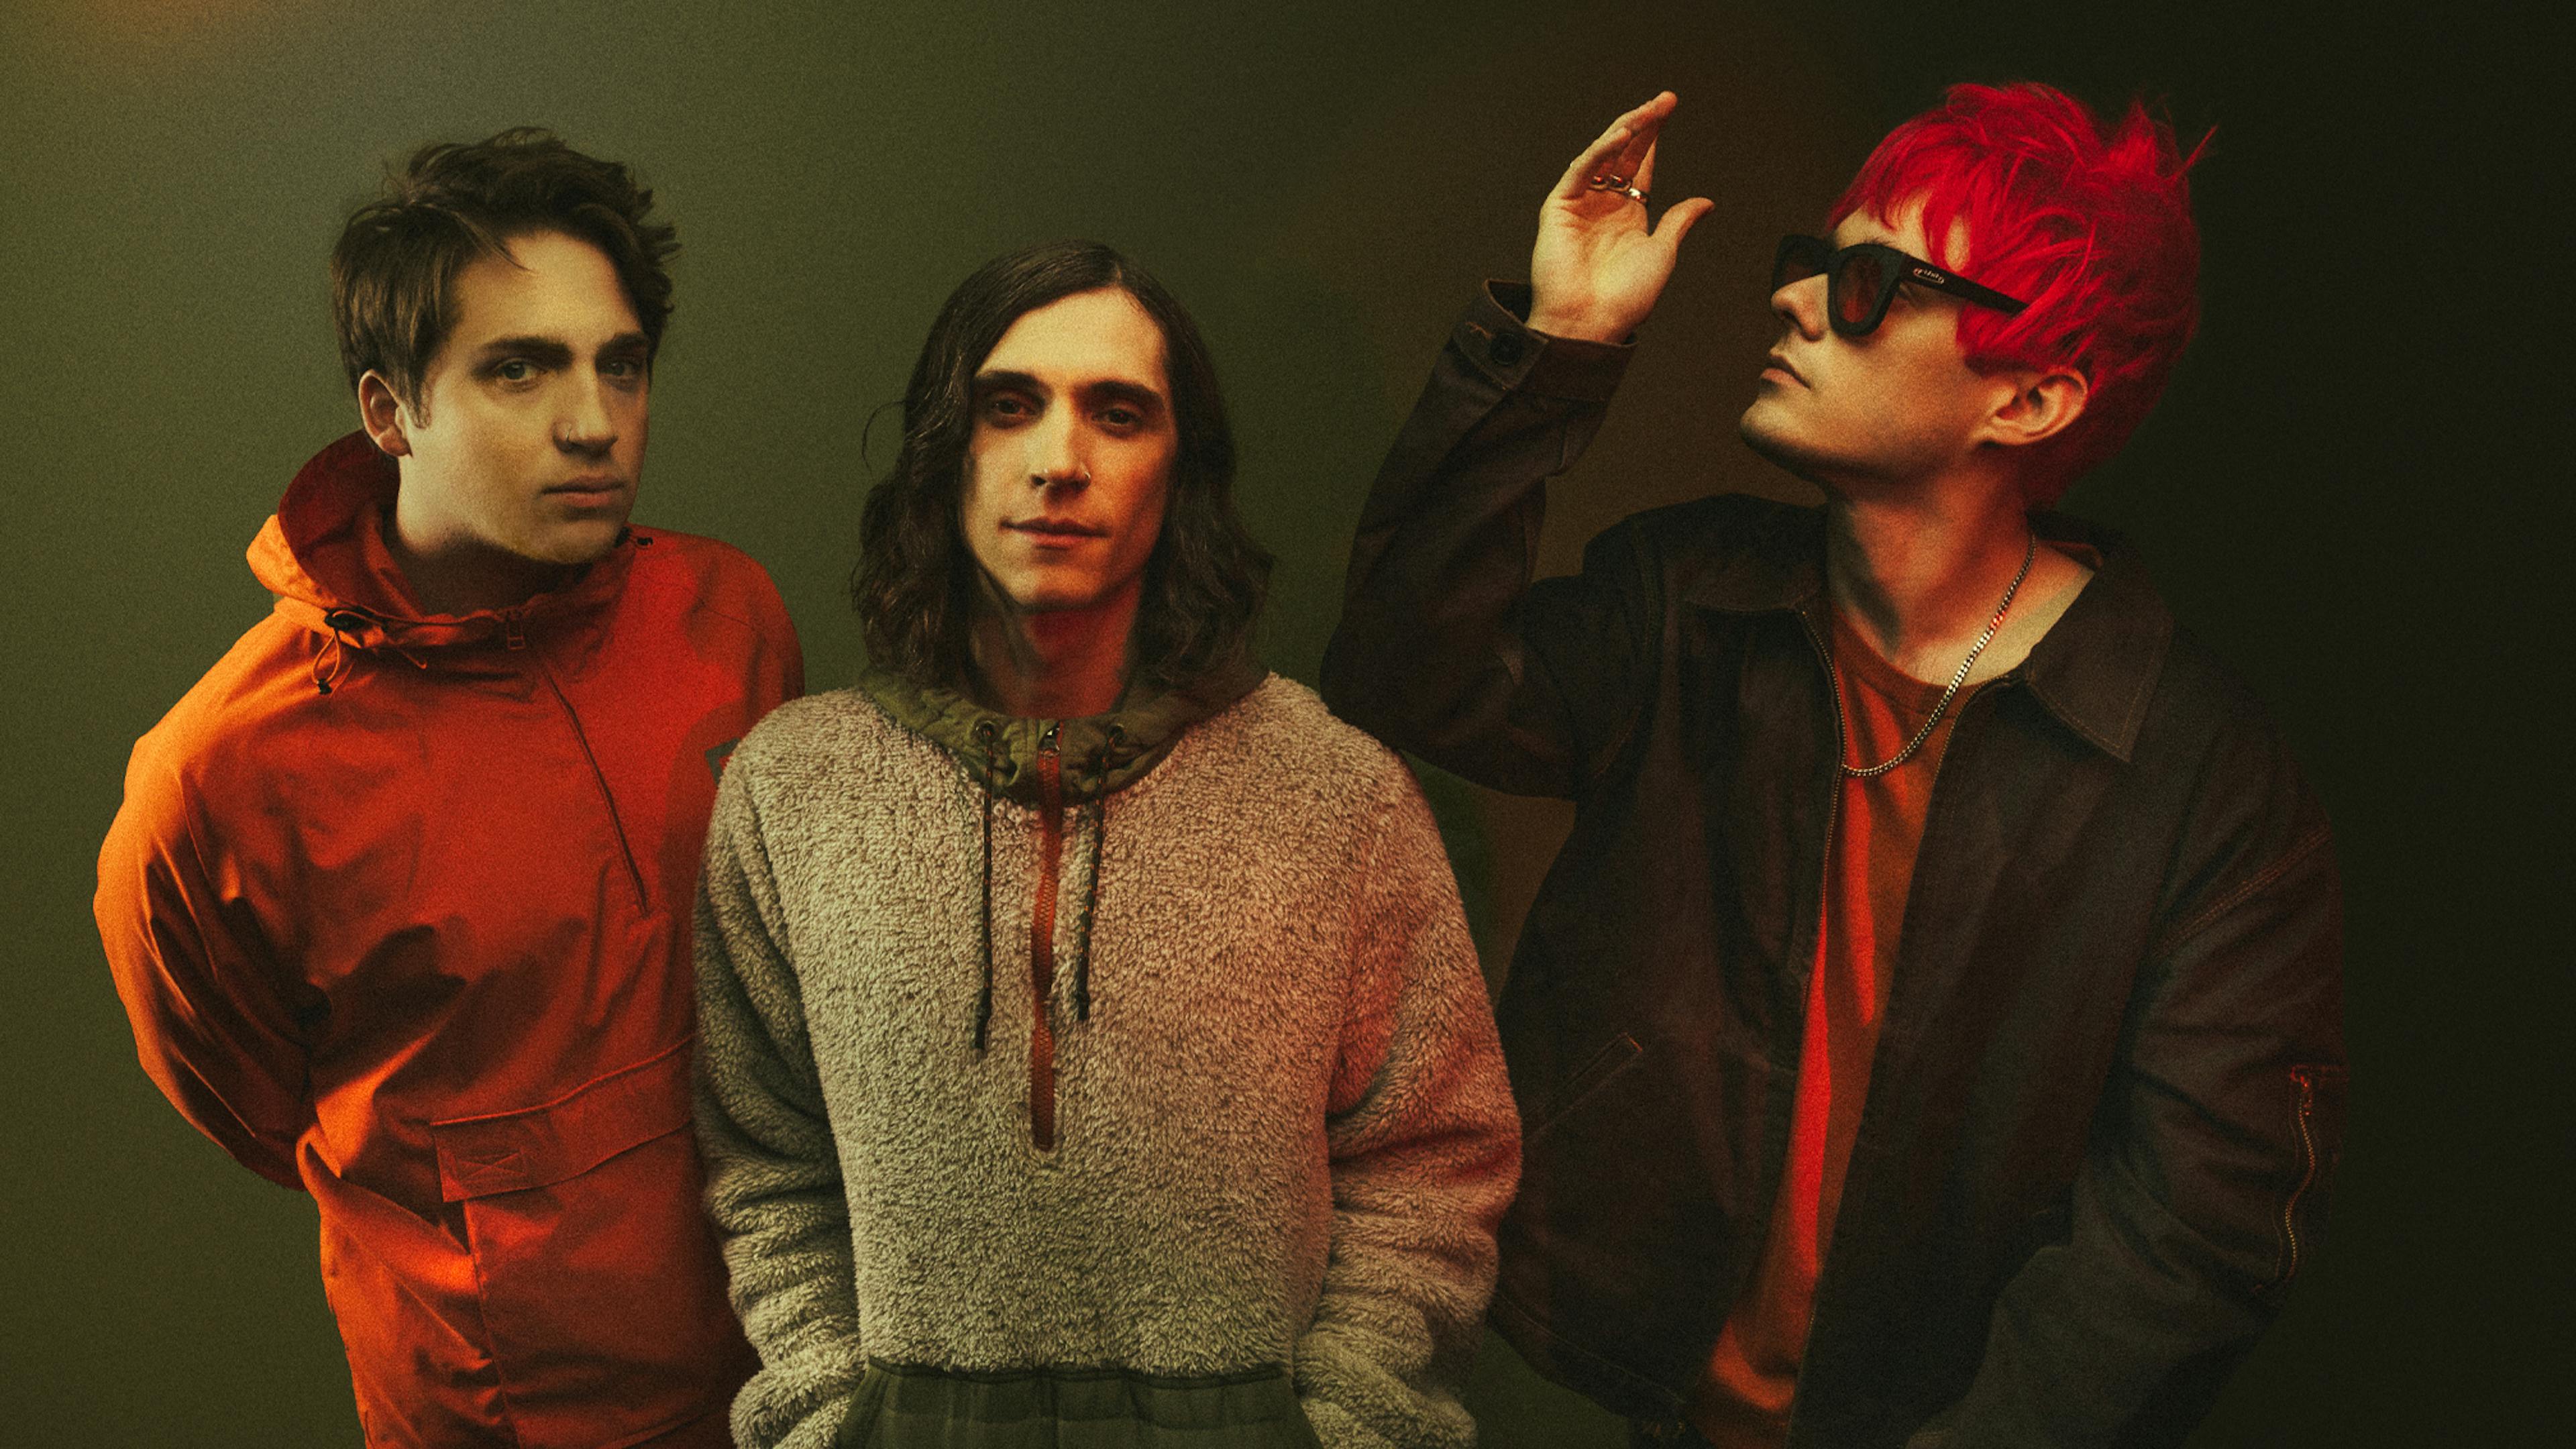 Waterparks announce new single featuring blackbear